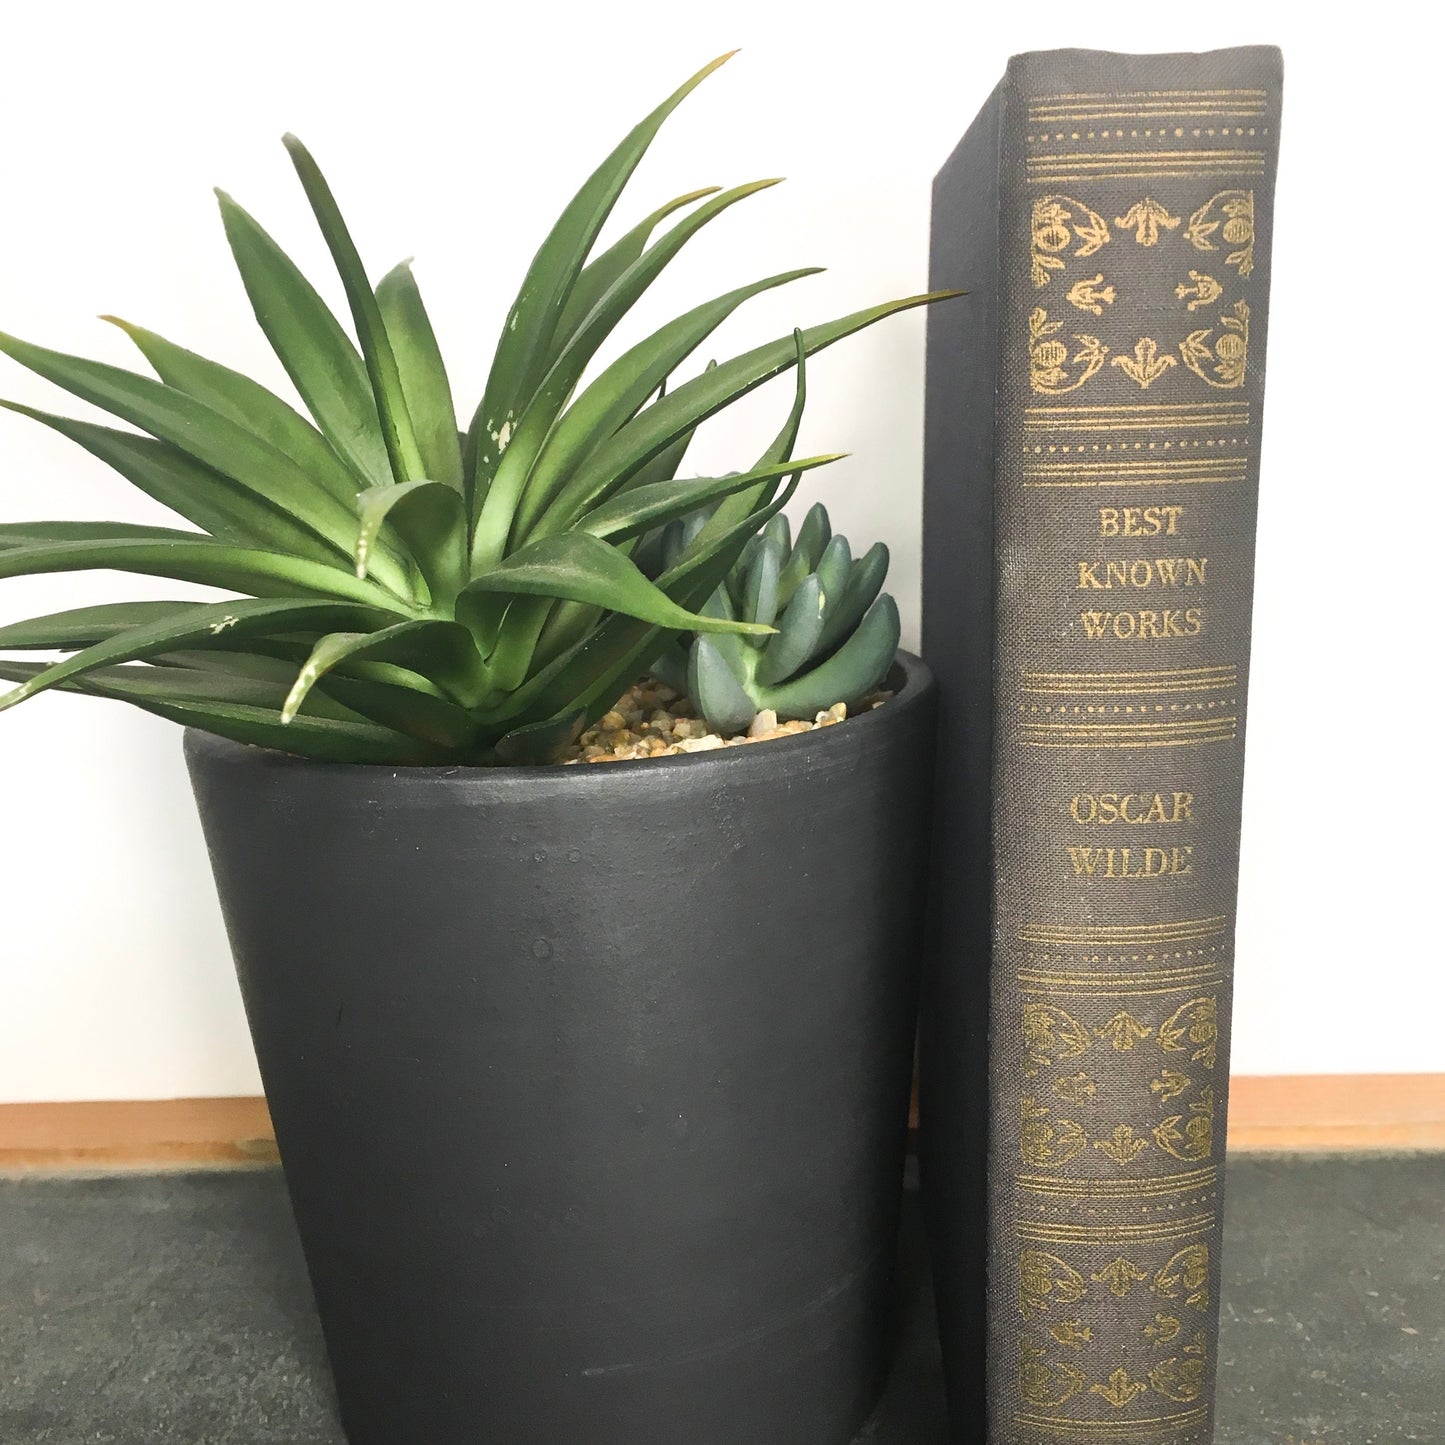 The Best Known Works of Oscar Wilde - vintage blue cloth bound edition